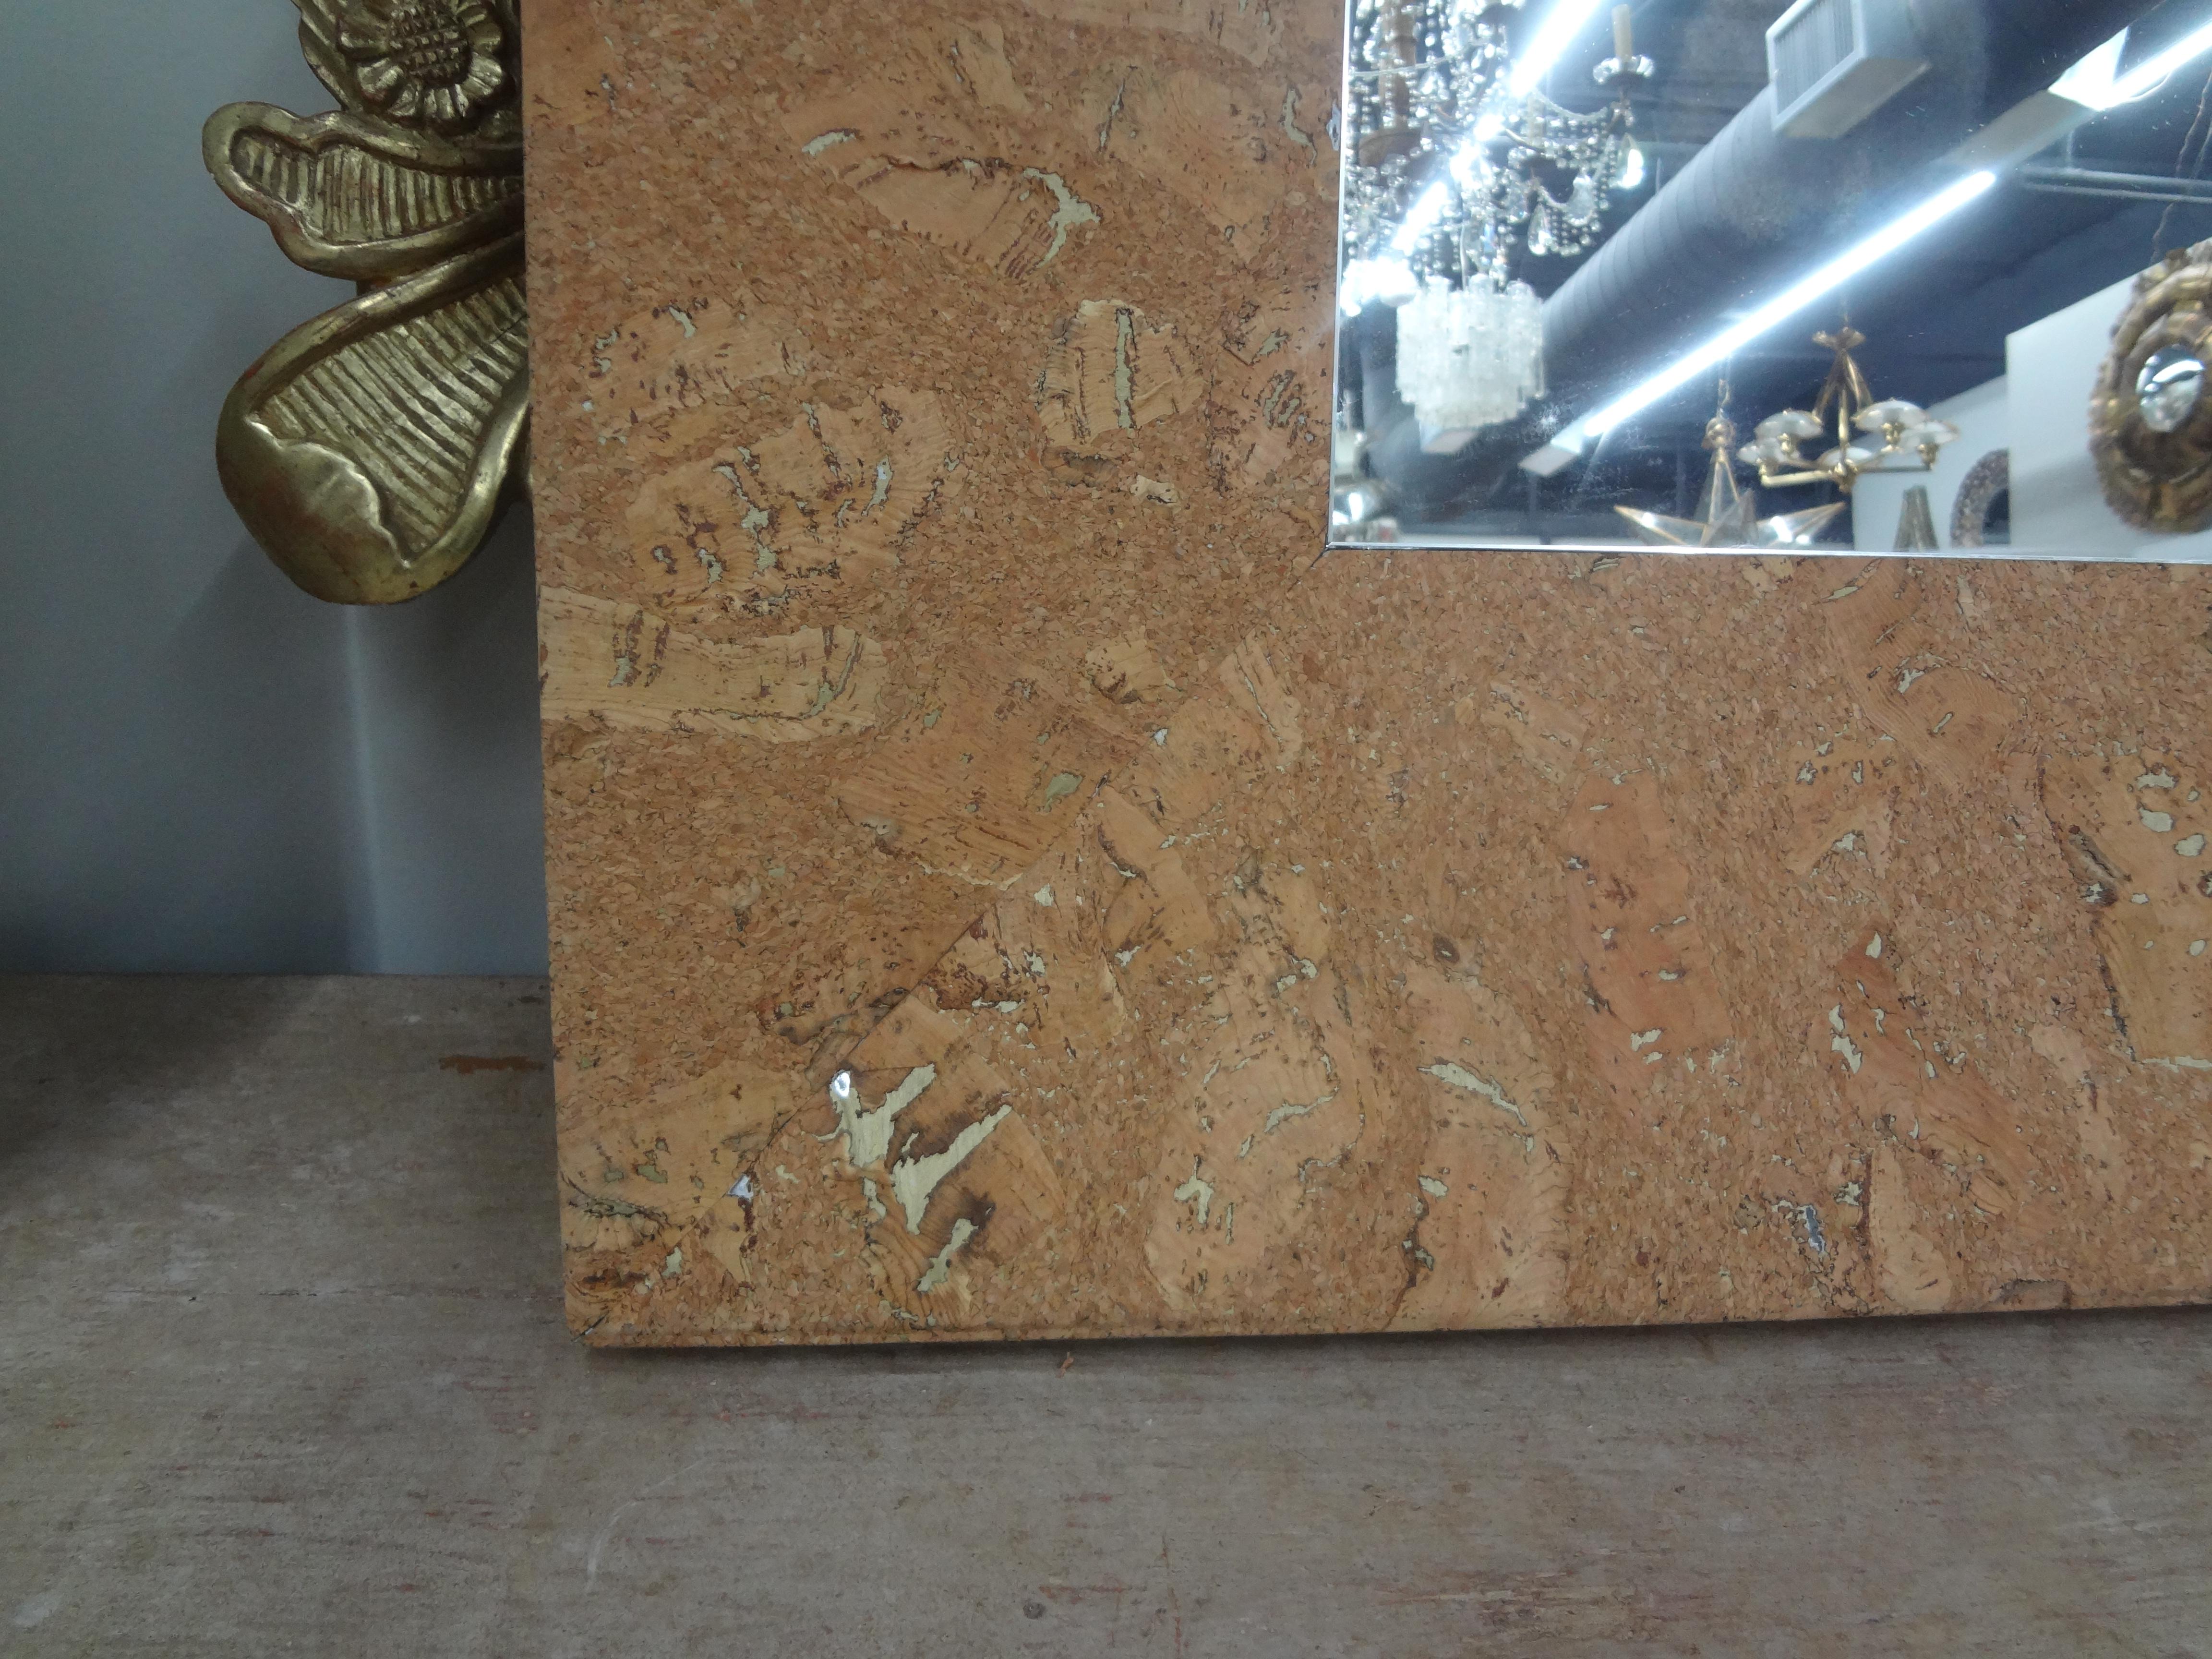 Italian Modern Square Cork Mirror.
This handsome Italian mid century modern square cork mirror was executed in a most unusual type of cork and is versatile enough to work in a variety of interiors or design themes.
Stunning!